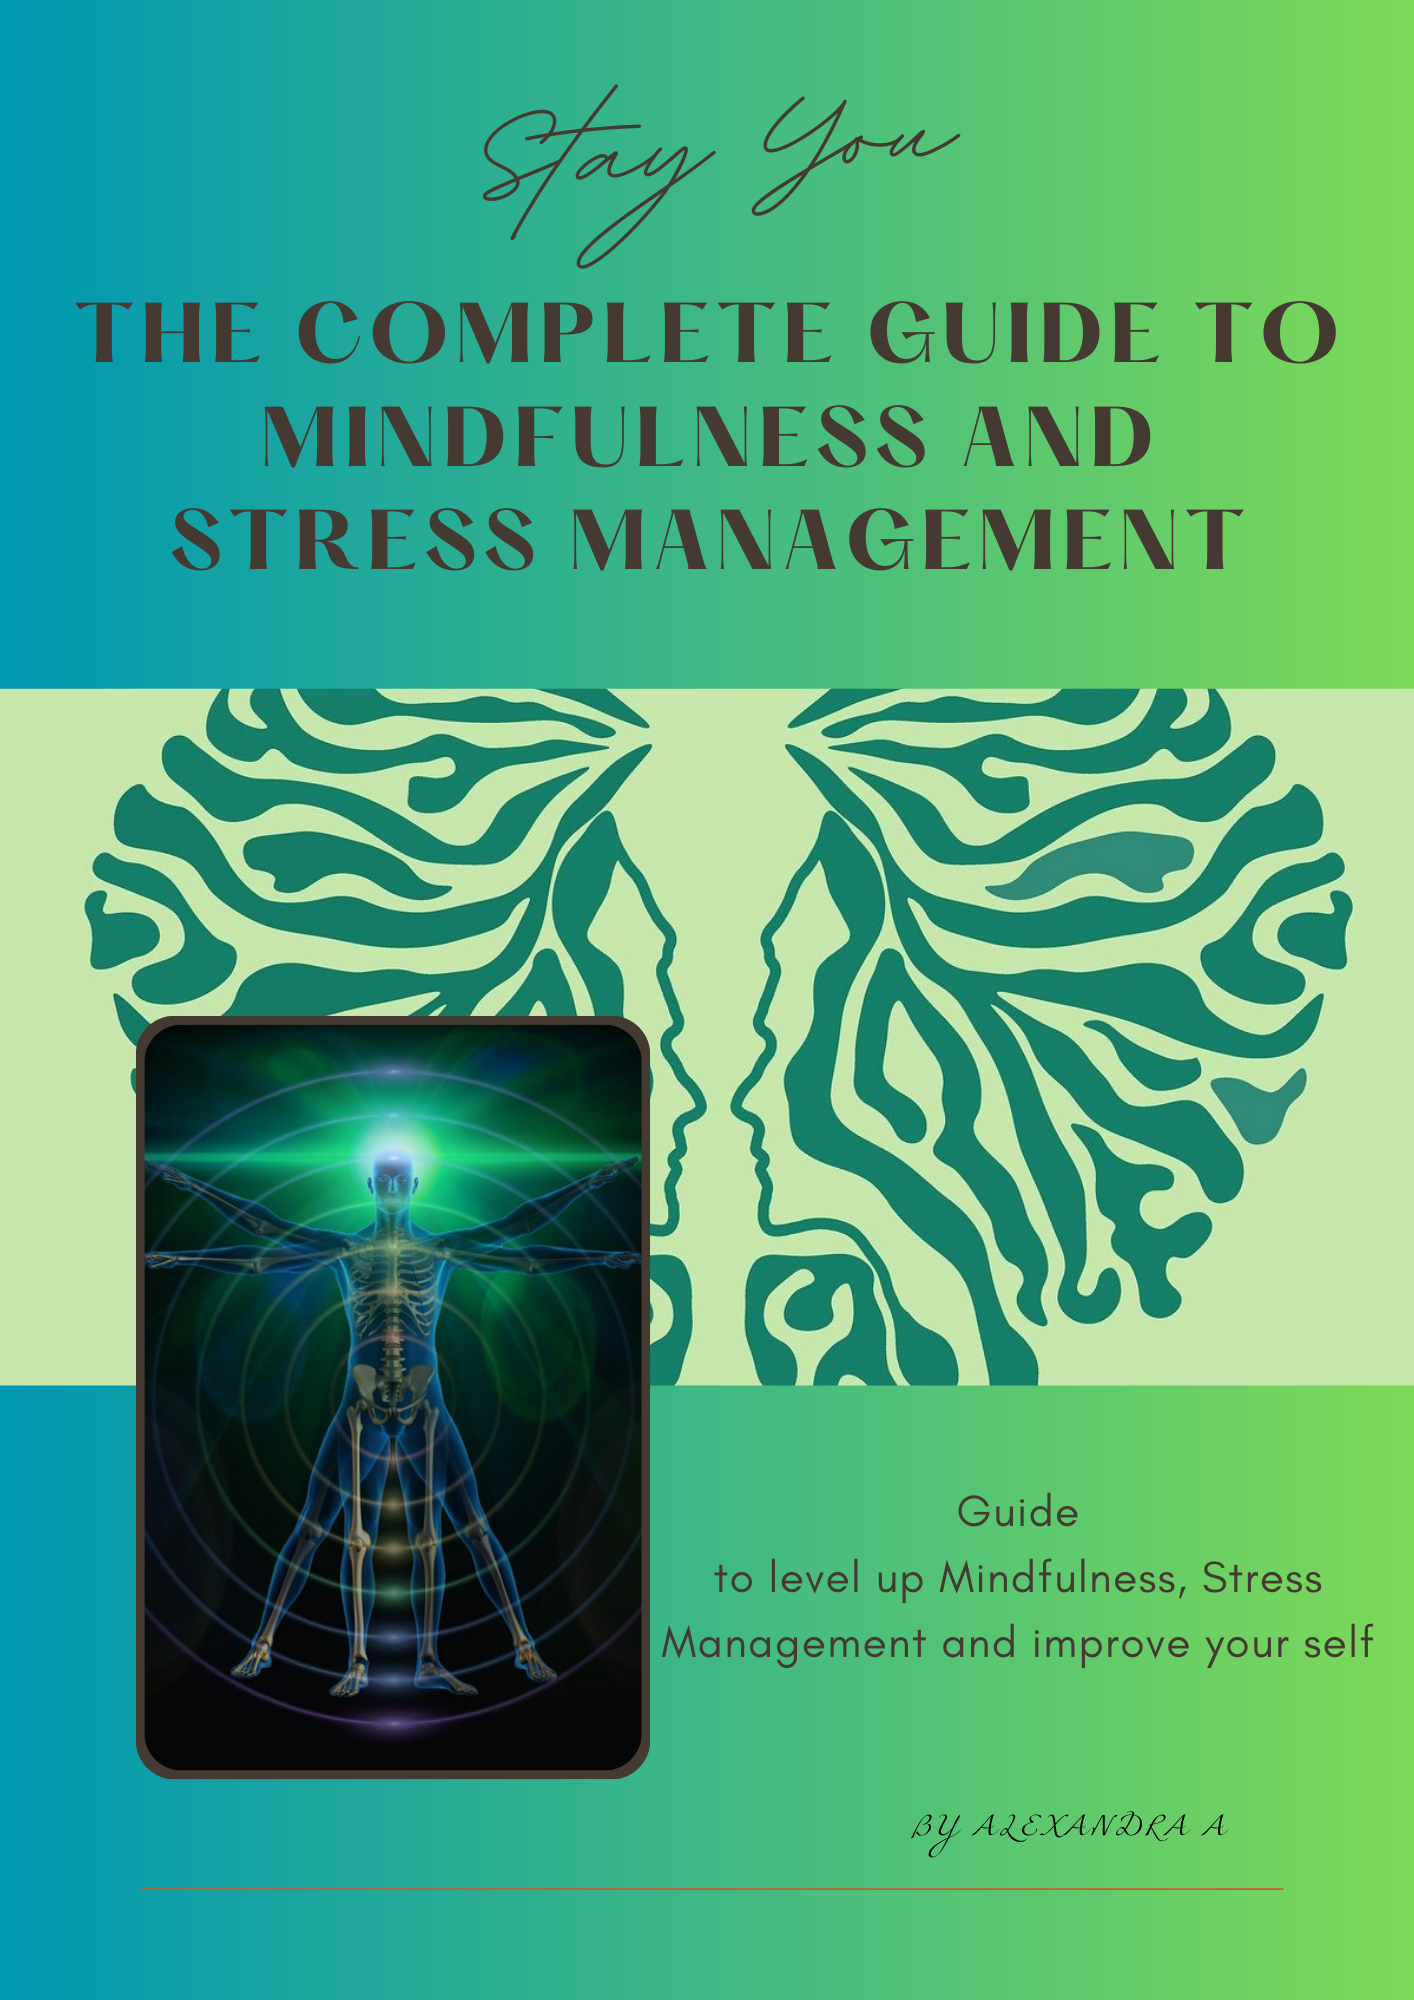 The Complete Guide to Mindfulness, Stress Management and Productive Management